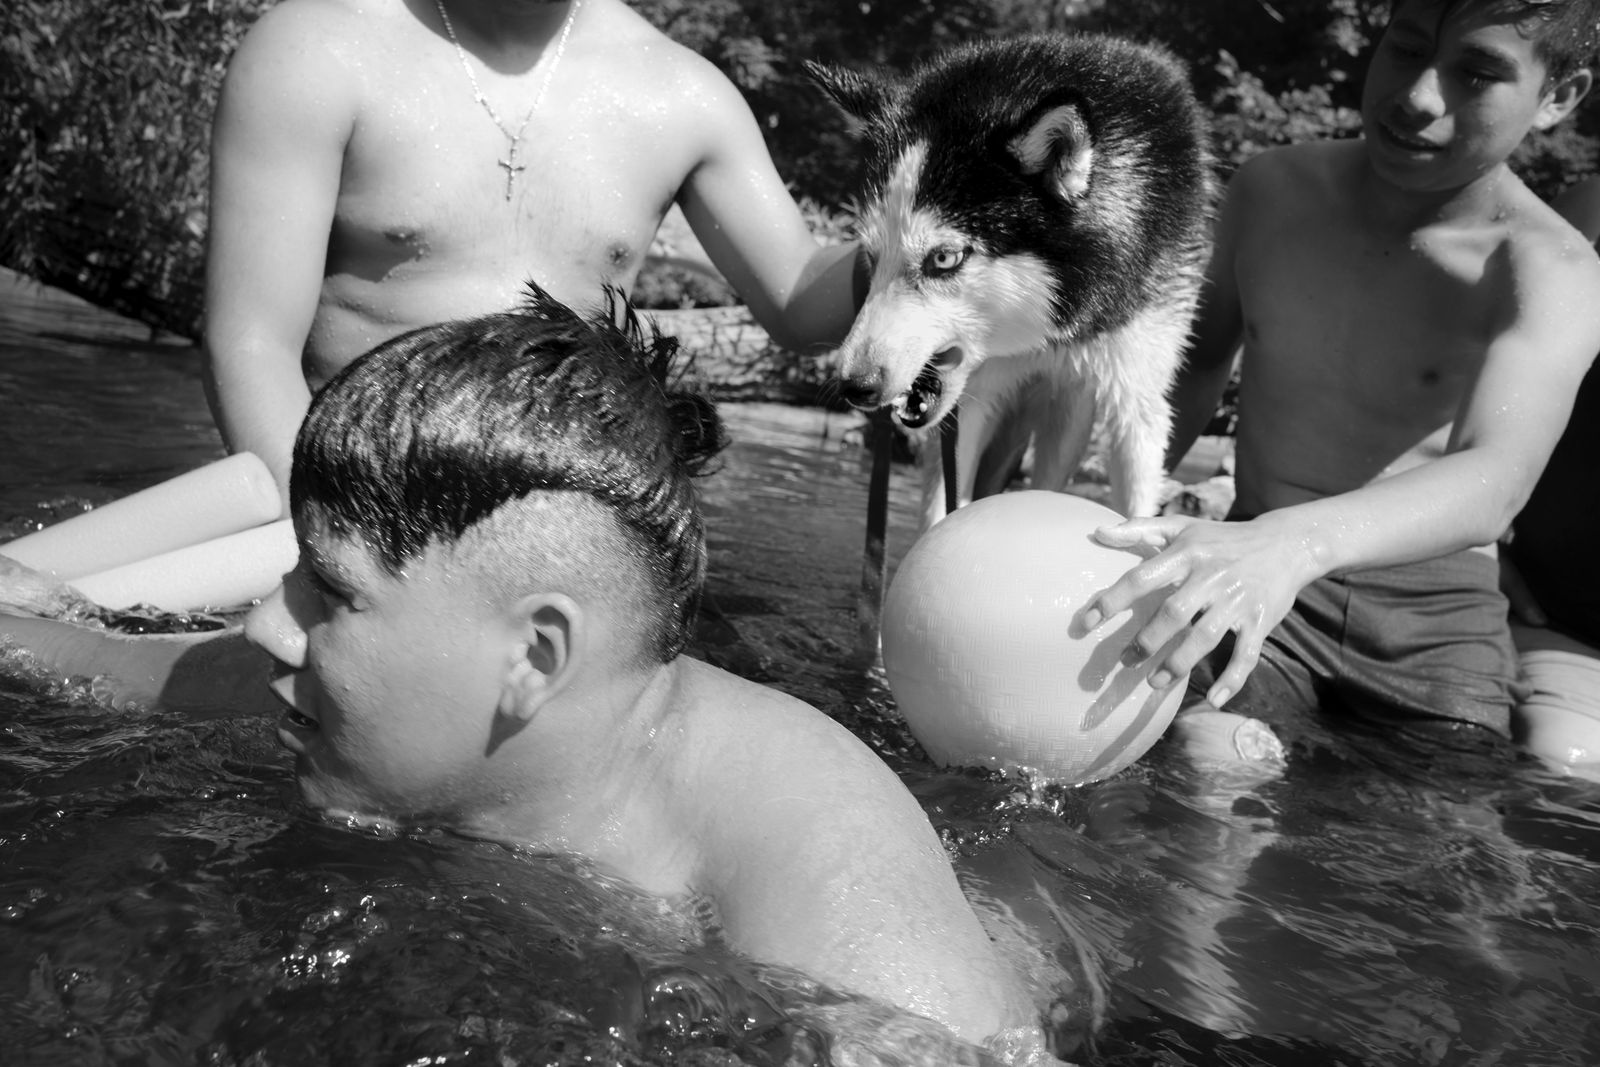 © Caleb Stein - Boys Playing With Their Huskie. The Watering Hole. 2018.